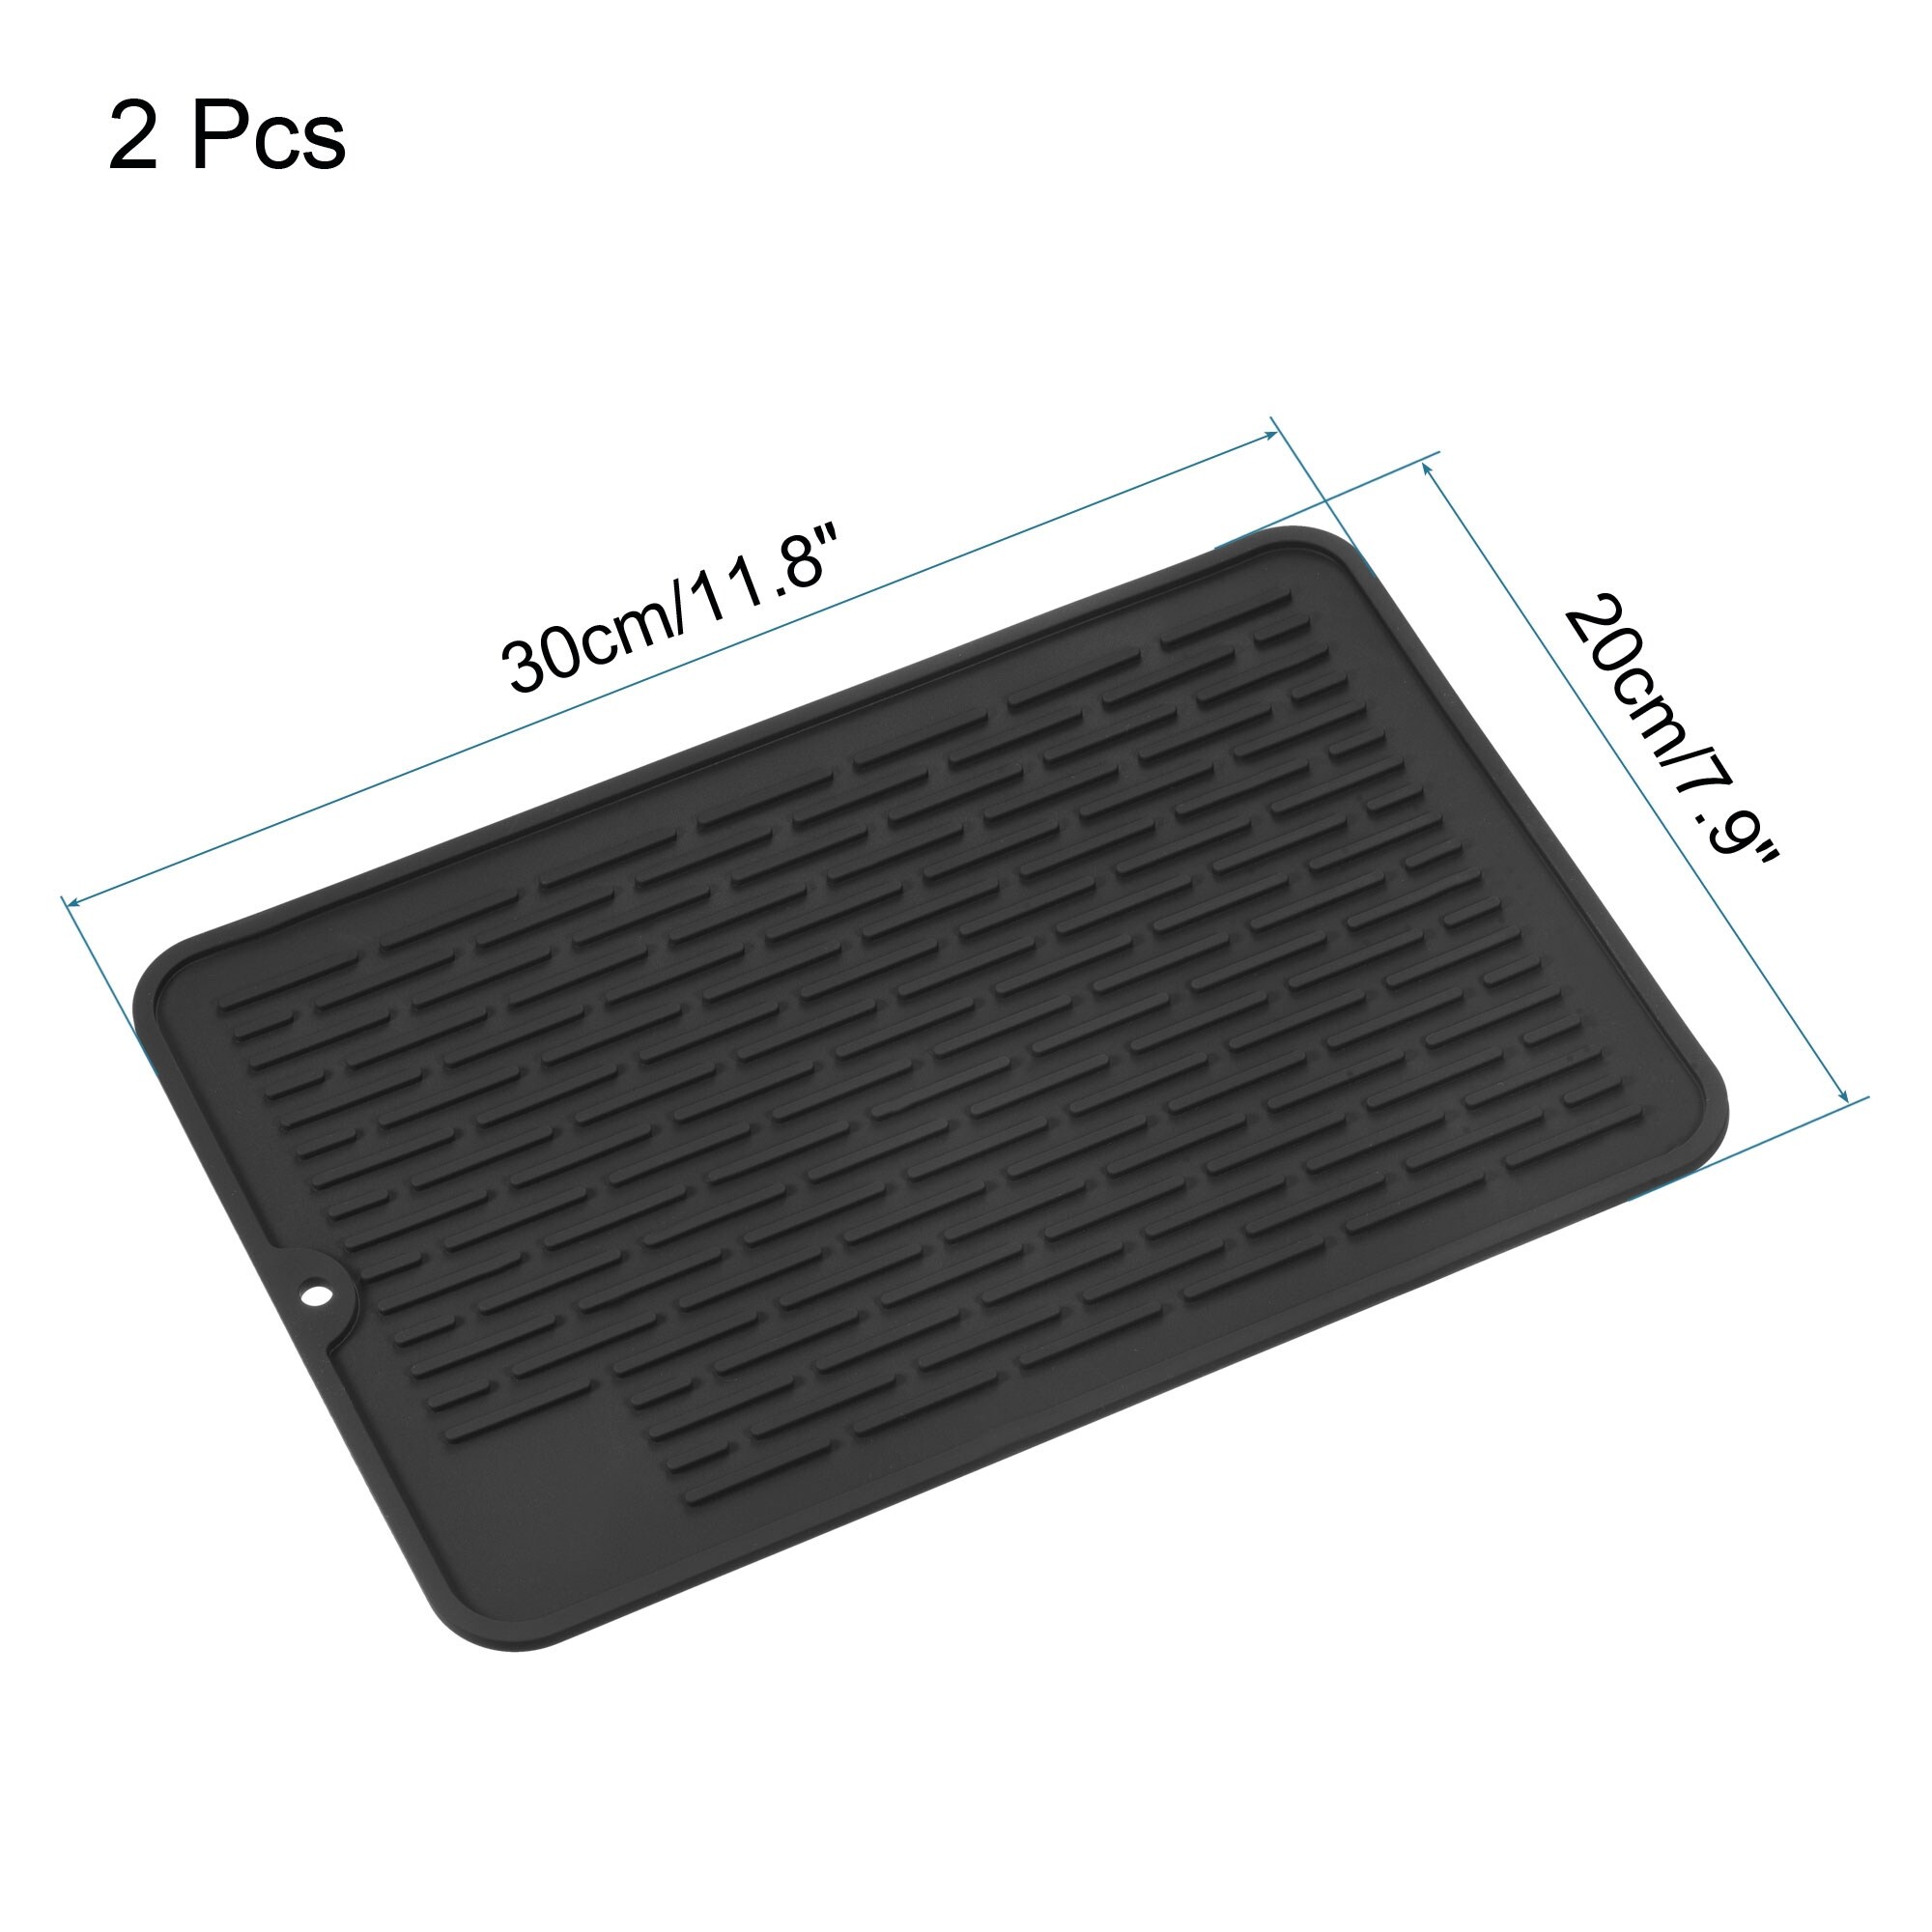 https://ak1.ostkcdn.com/images/products/is/images/direct/d0c34b5b9f63d8f50da2e1eaa462404f641caa90/Silicone-Dish-Drying-Mat-2PCS%2C-Drying-Mat-for-Kitchen-Counter-2PCS.jpg